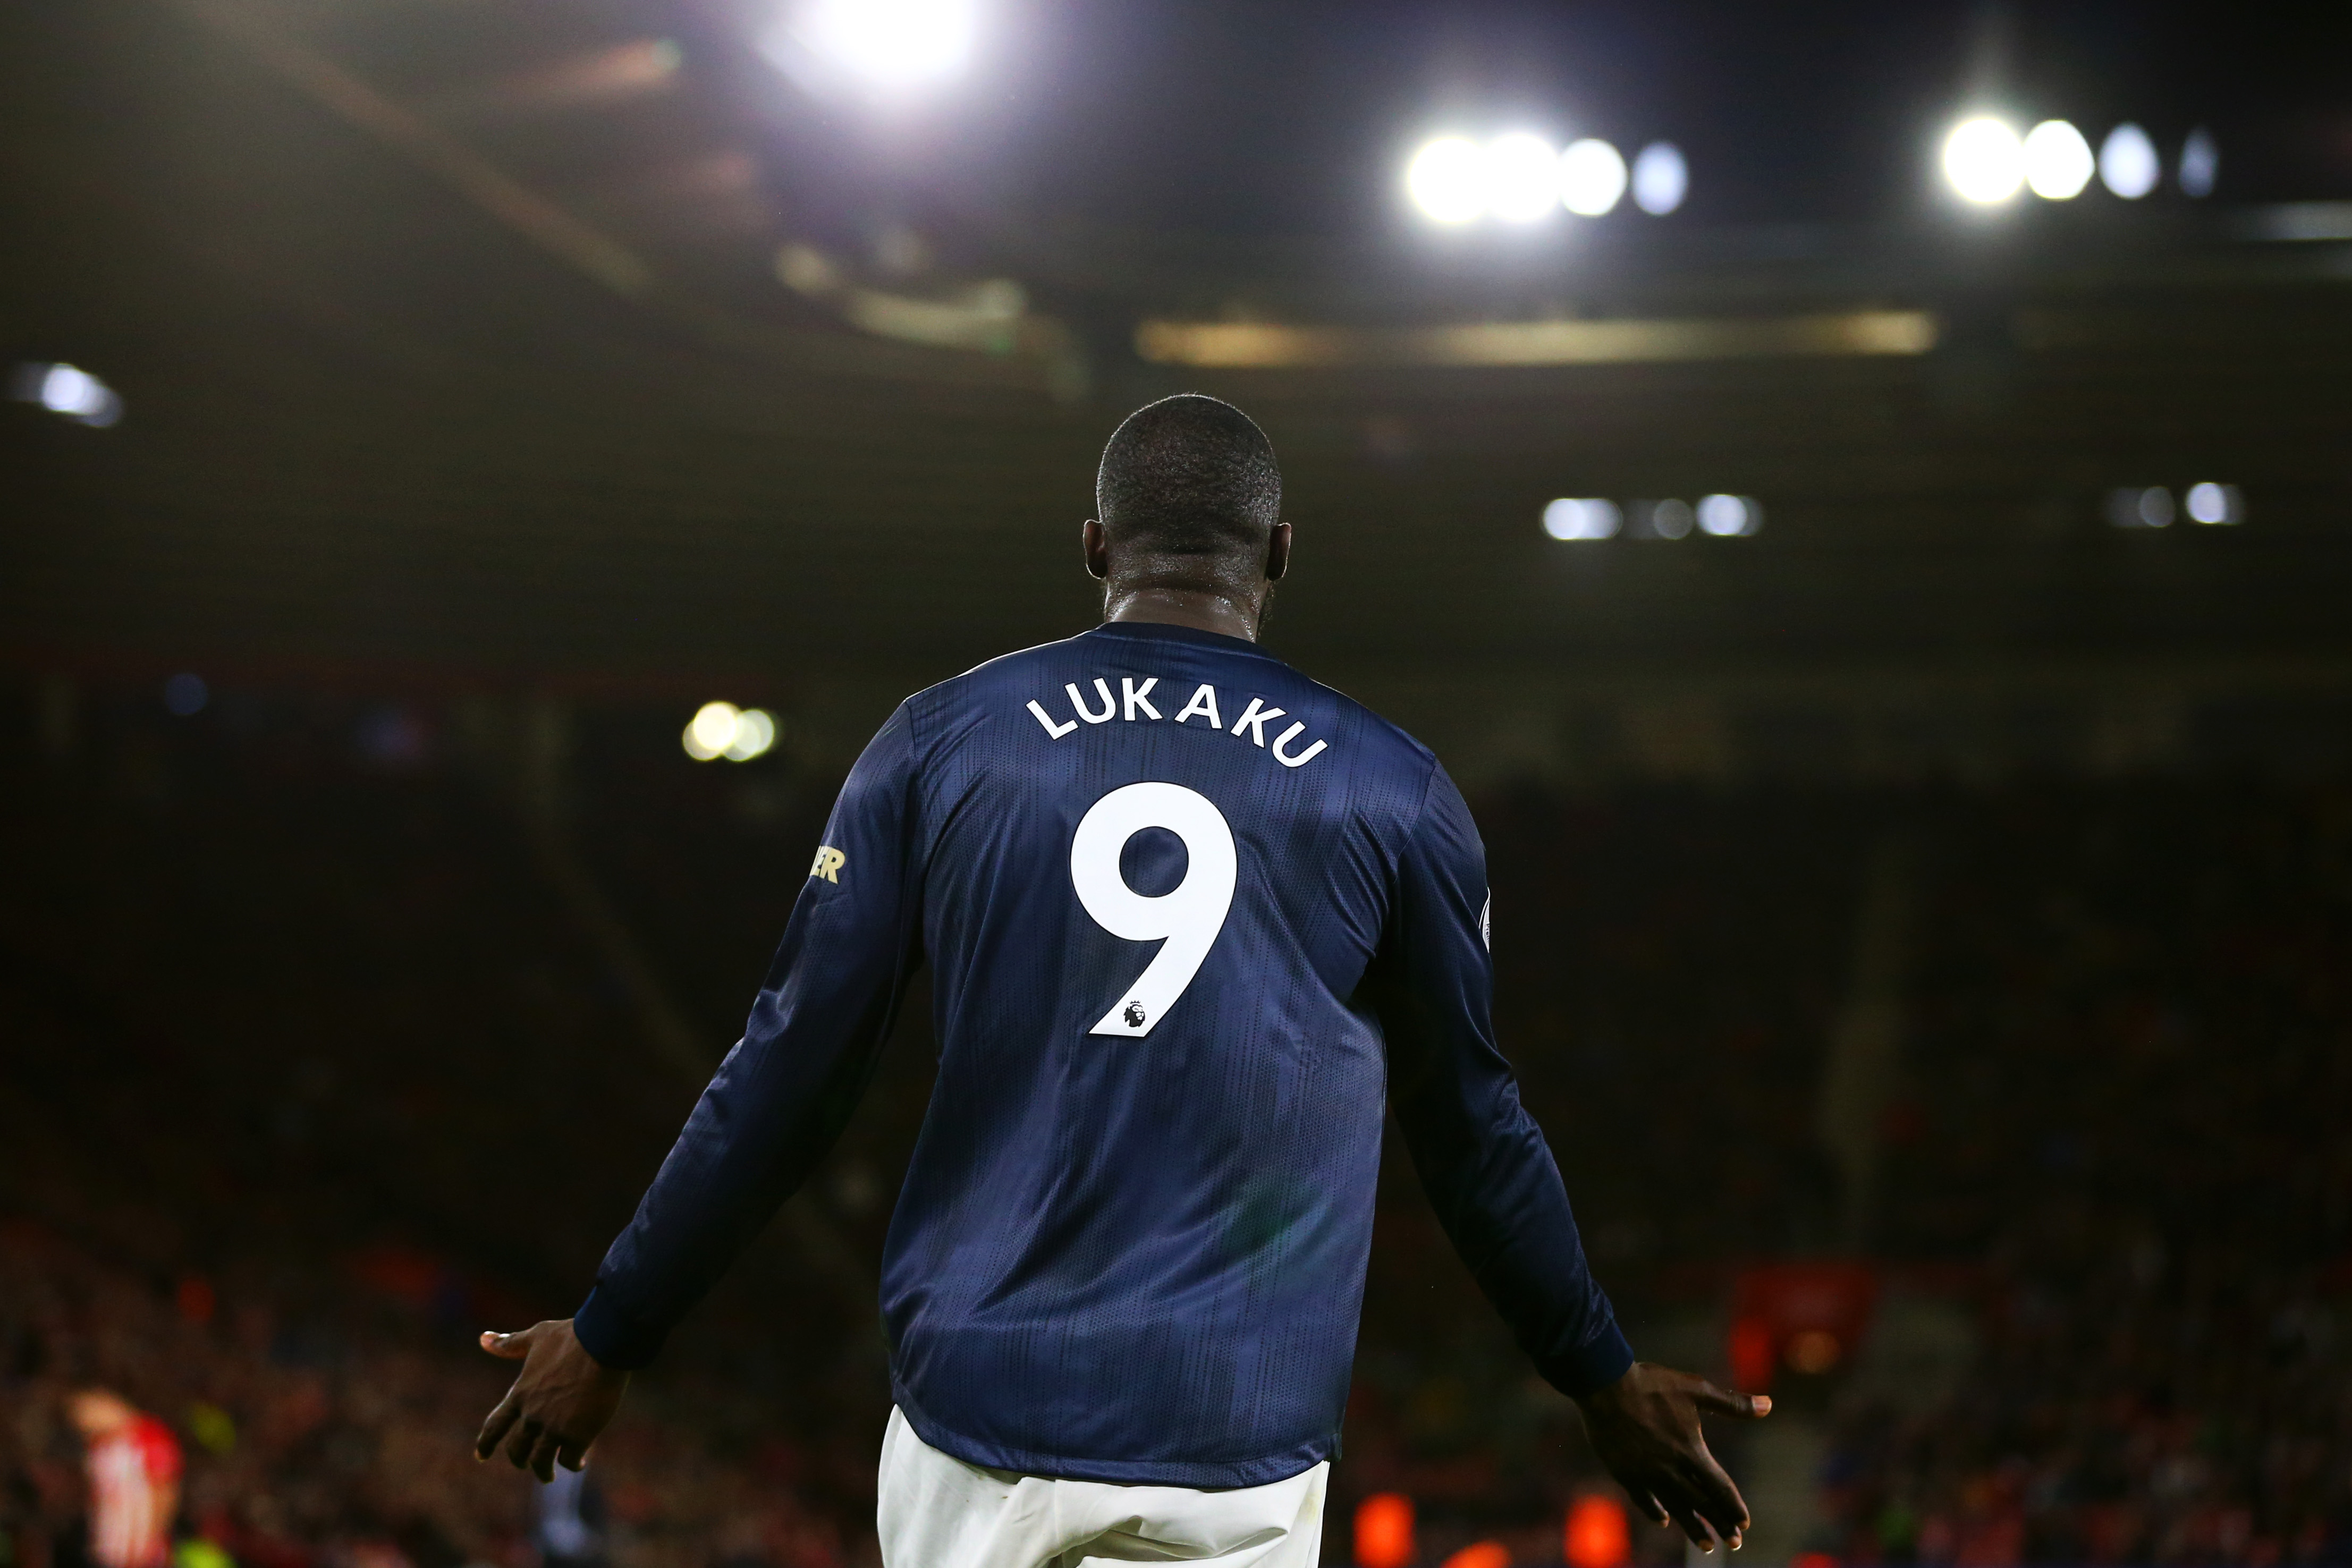 After showing his back to Manchester United two years ago, is a return to Old Trafford possible at all for Lukaku? (Photo by Dan Istitene/Getty Images)